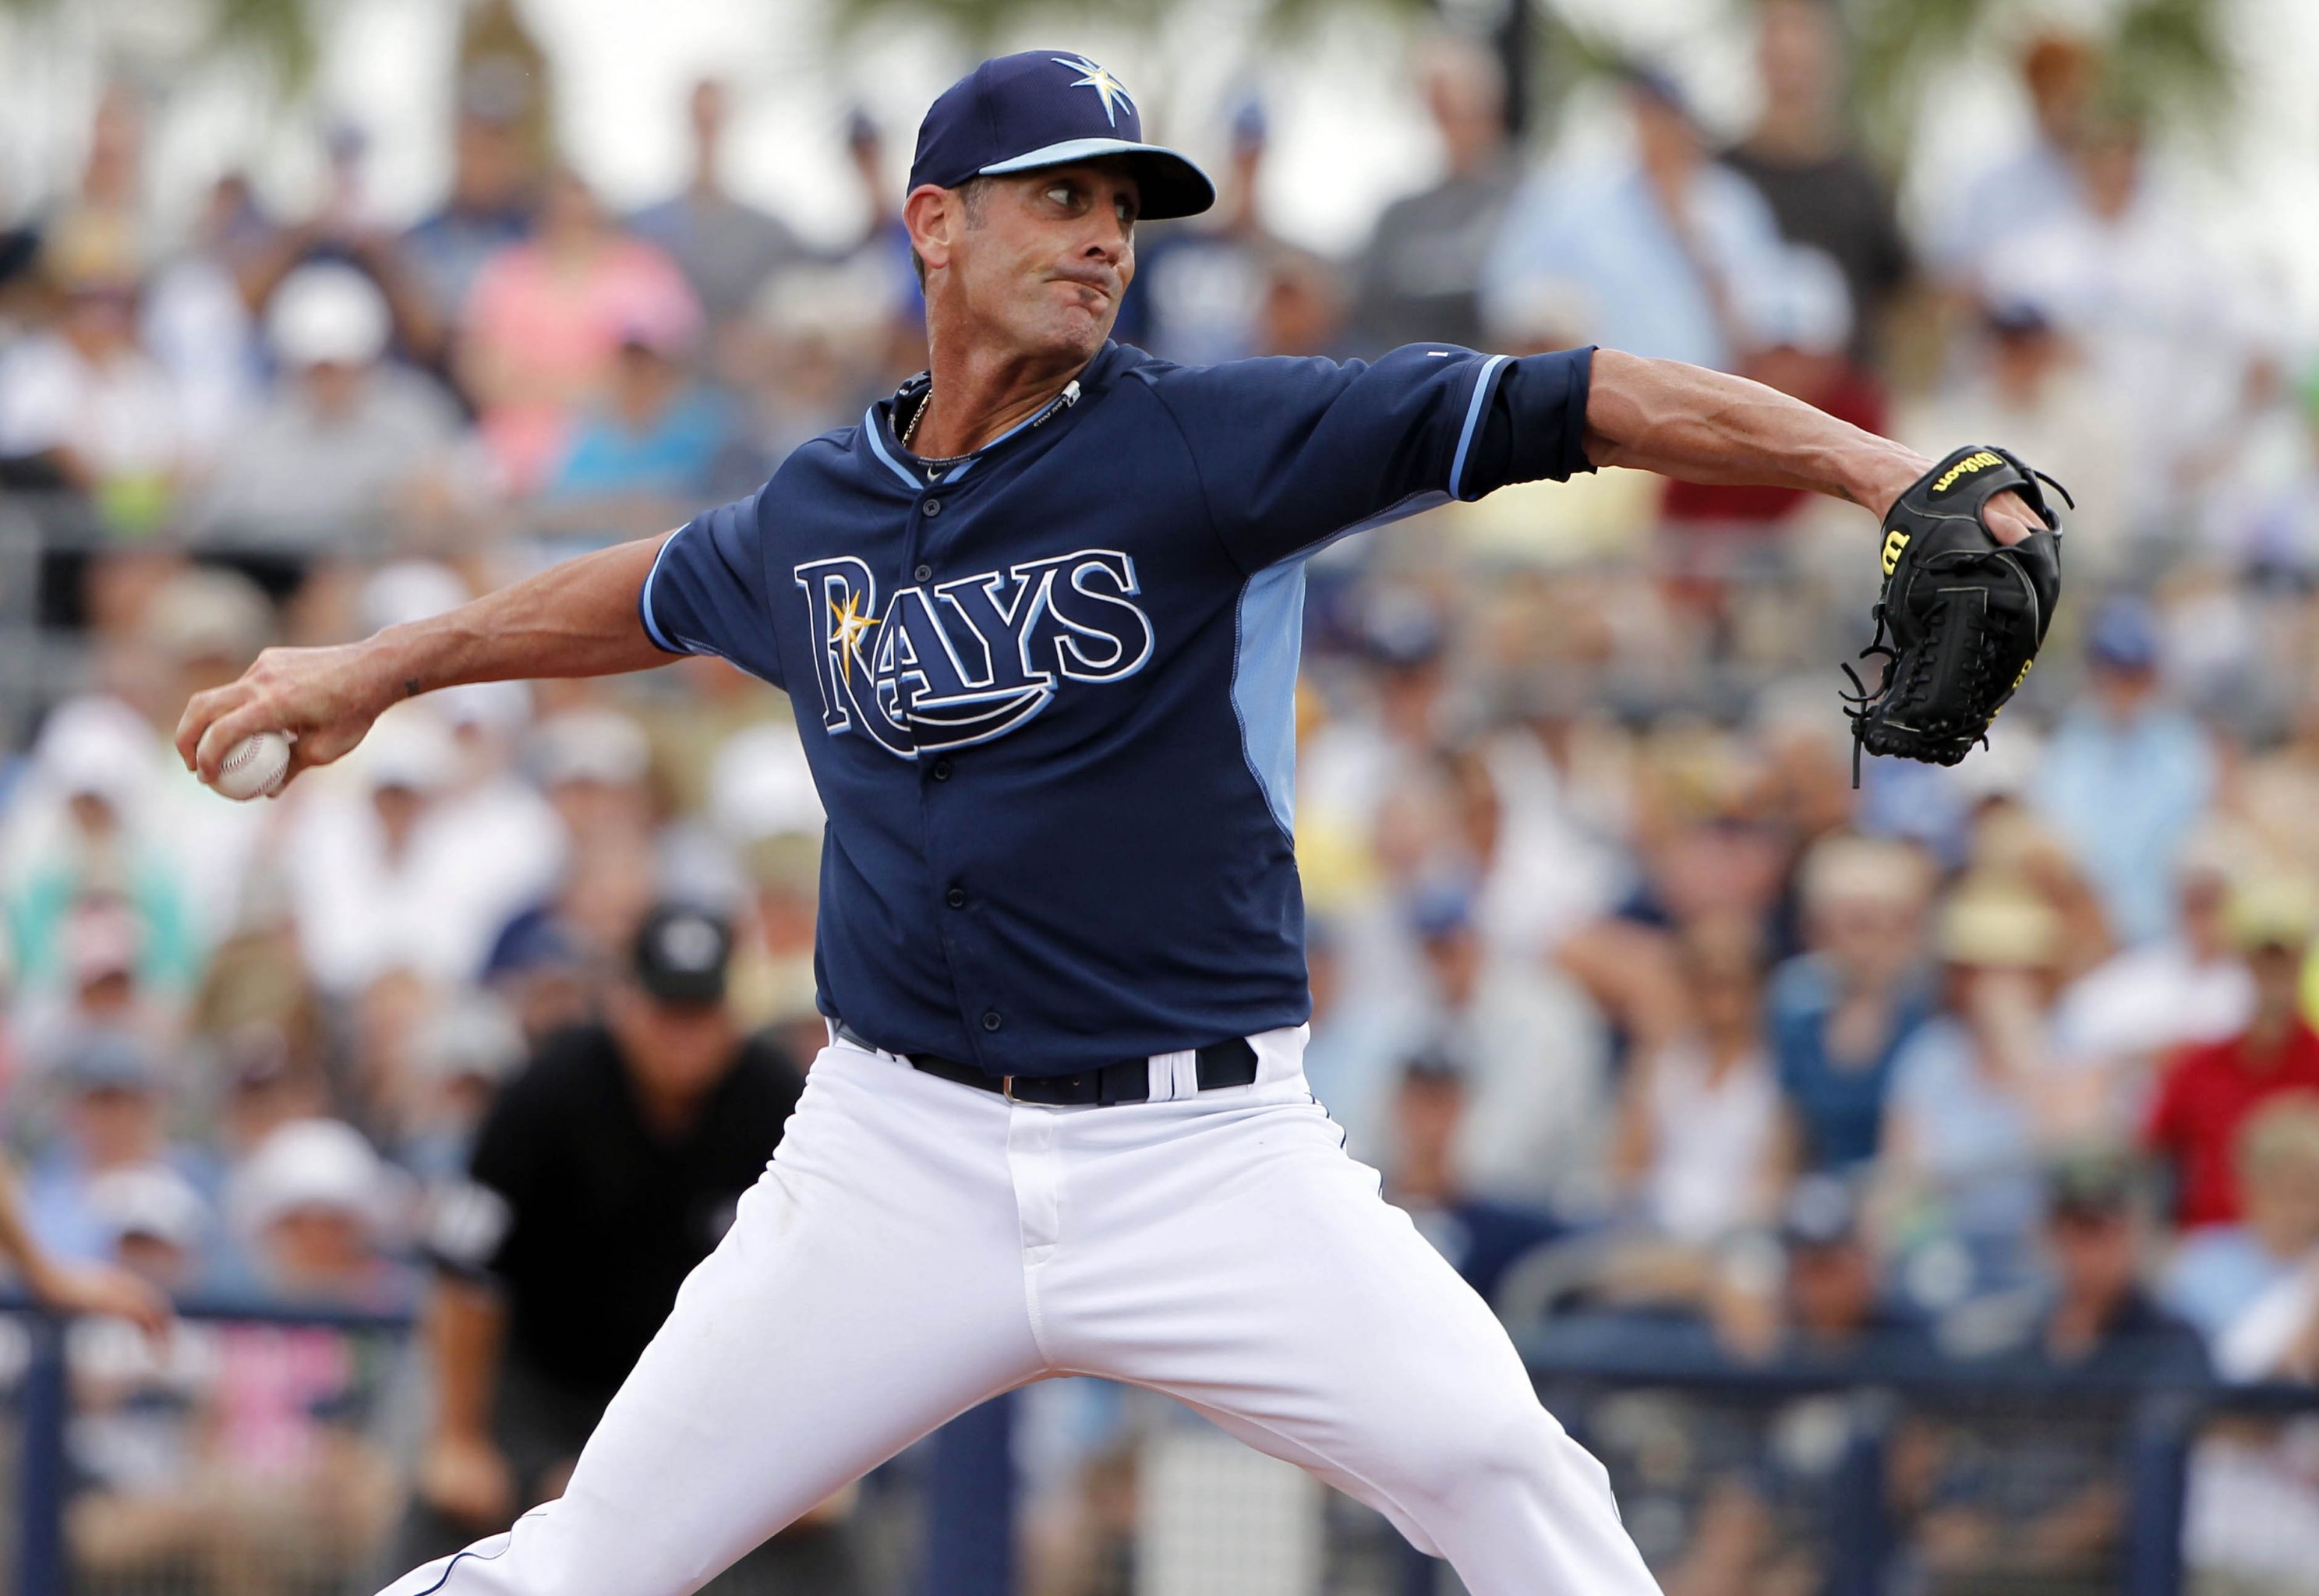 Season Preview 2014: Jake McGee and the curveball - DRaysBay